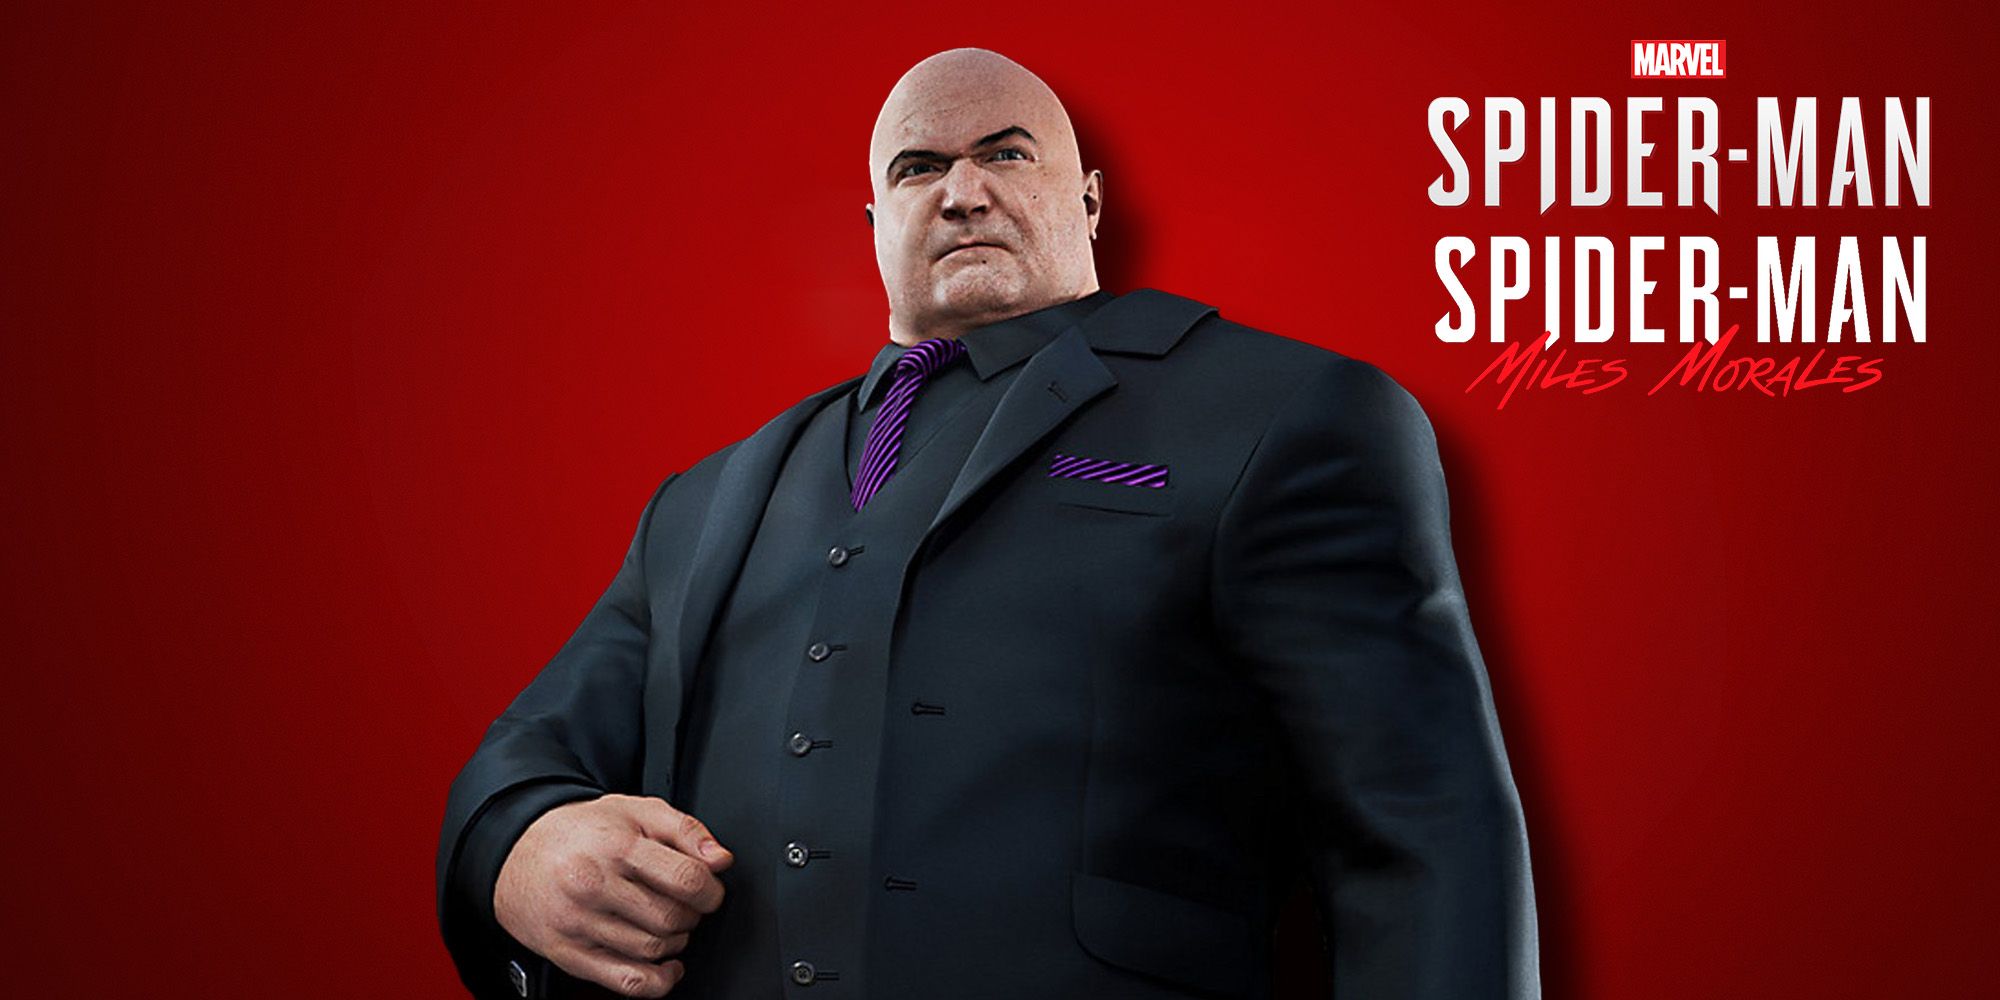 Wilson Fisk aka Kingpin in front of red backdrop. Spider-Man and Spider-Man: Miles Morales logo in top right of image. 